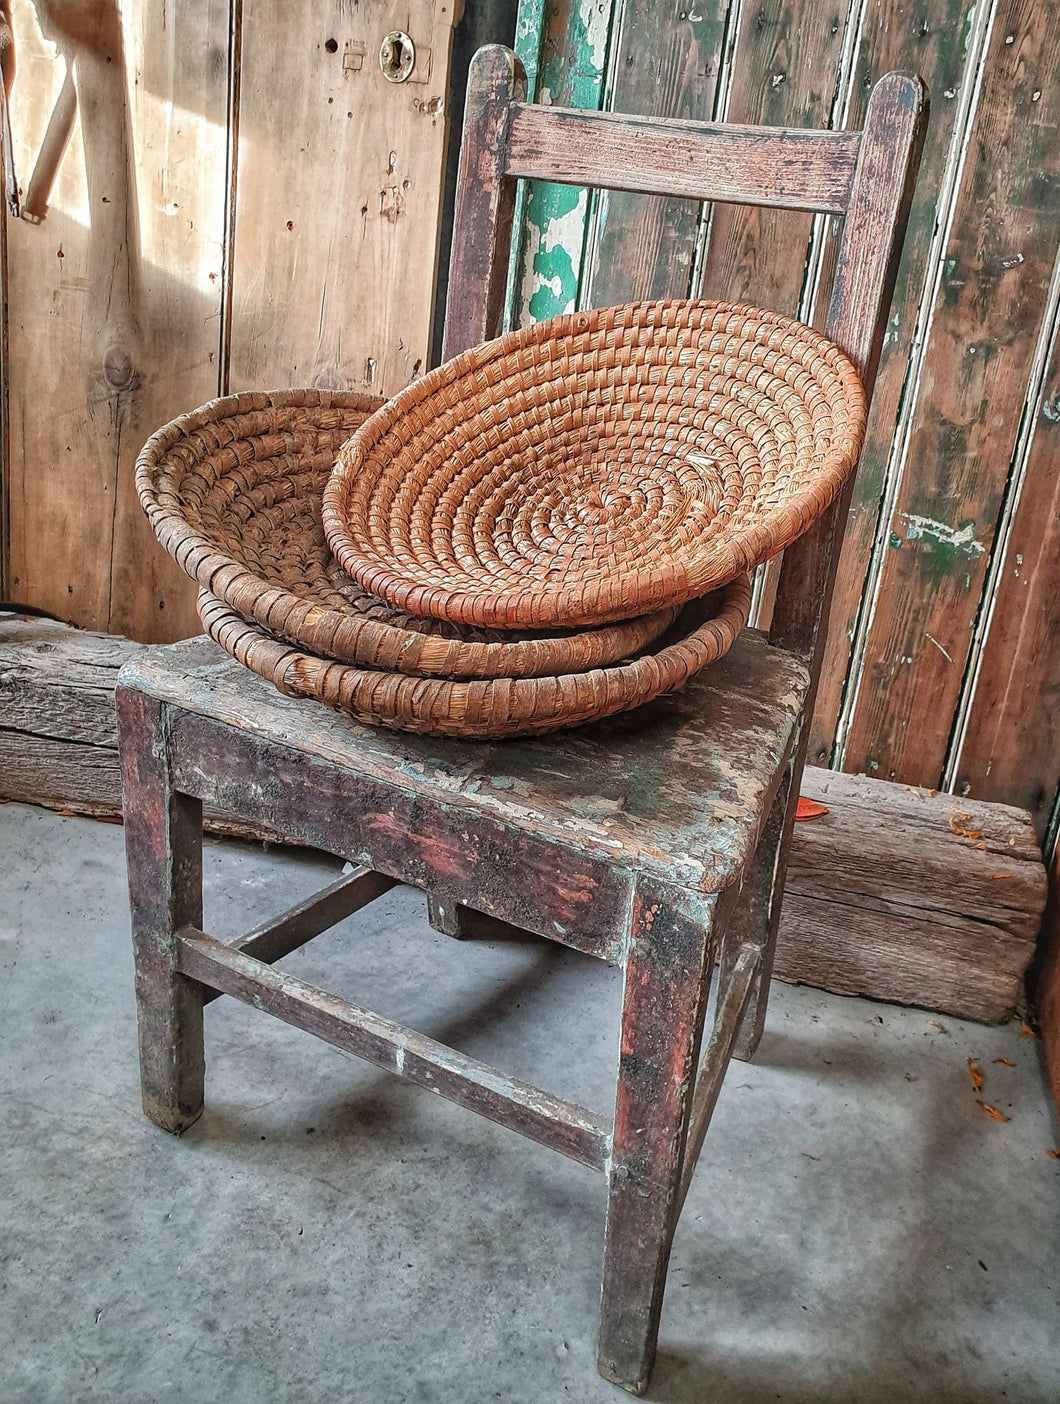  Rustic  Vintage French Rye Straw Farmhouse Basket on french farmhouse chair French country decor painted rustic furniture egg basket vegtable basket farmhouse decor dusty gems interiors nantwich 